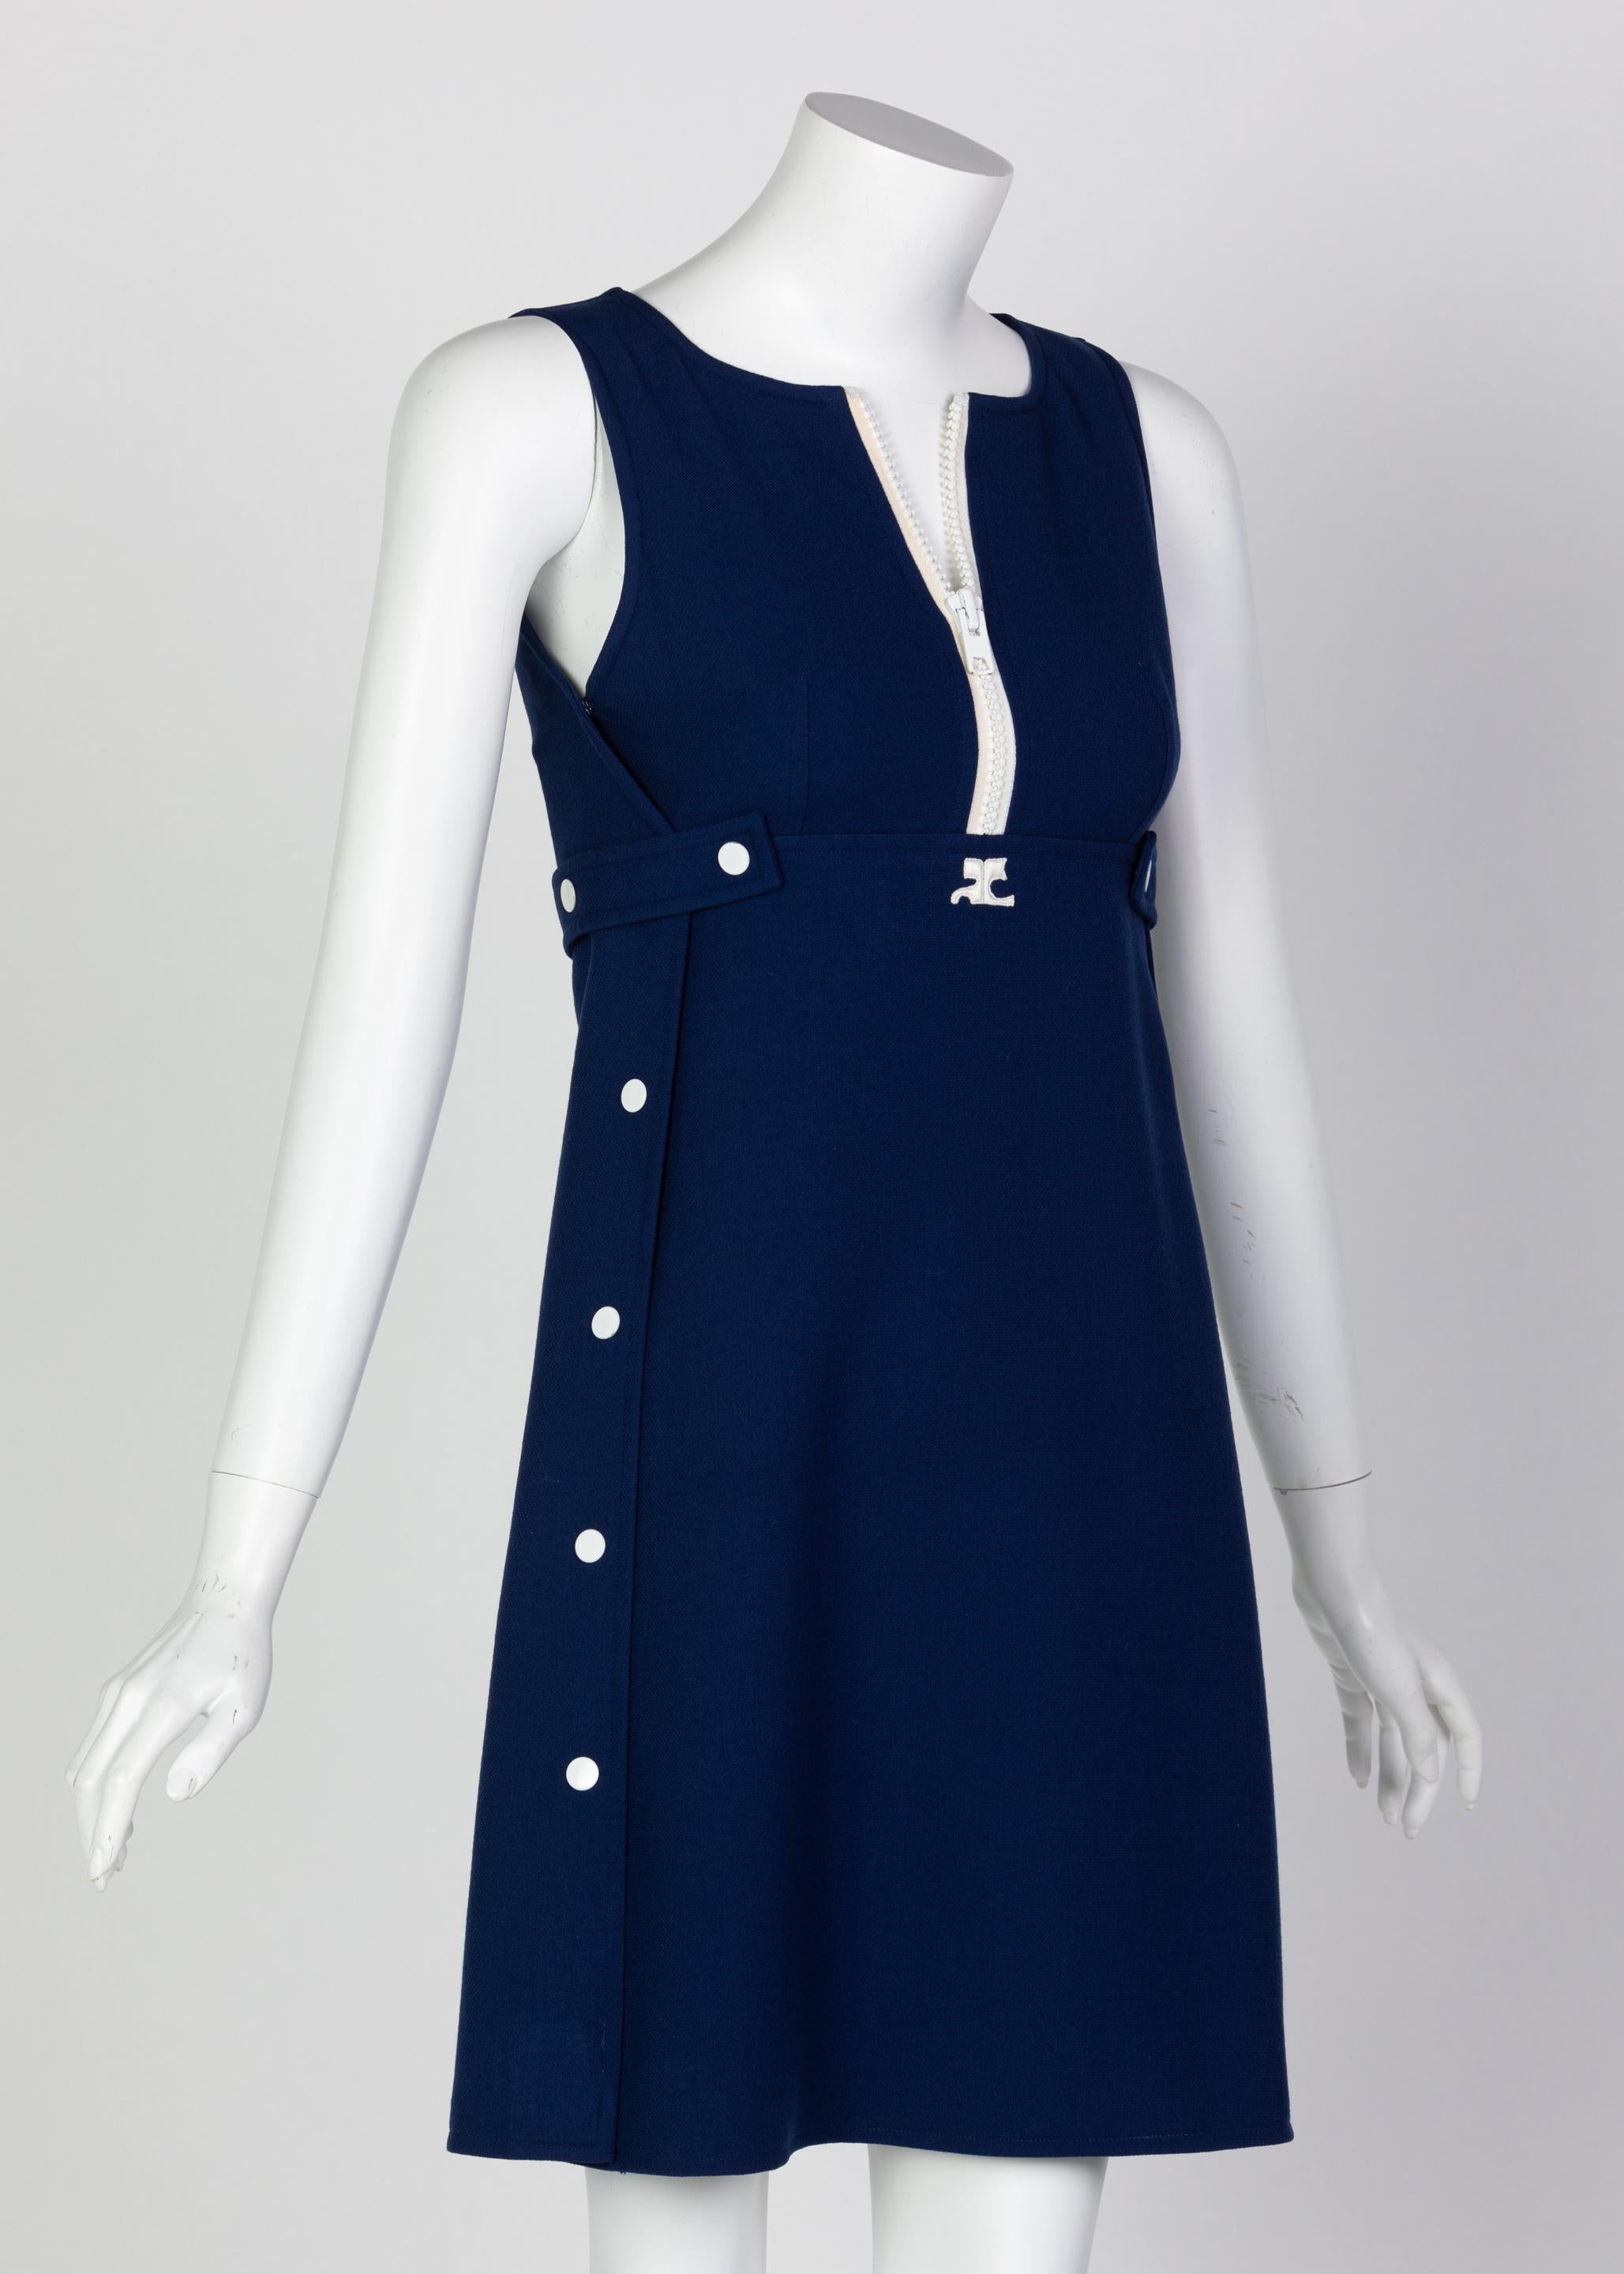 Courreges Numbered Couture Navy White Wool Zipper Mod Space-Age Dress, 1970s In Excellent Condition For Sale In Boca Raton, FL